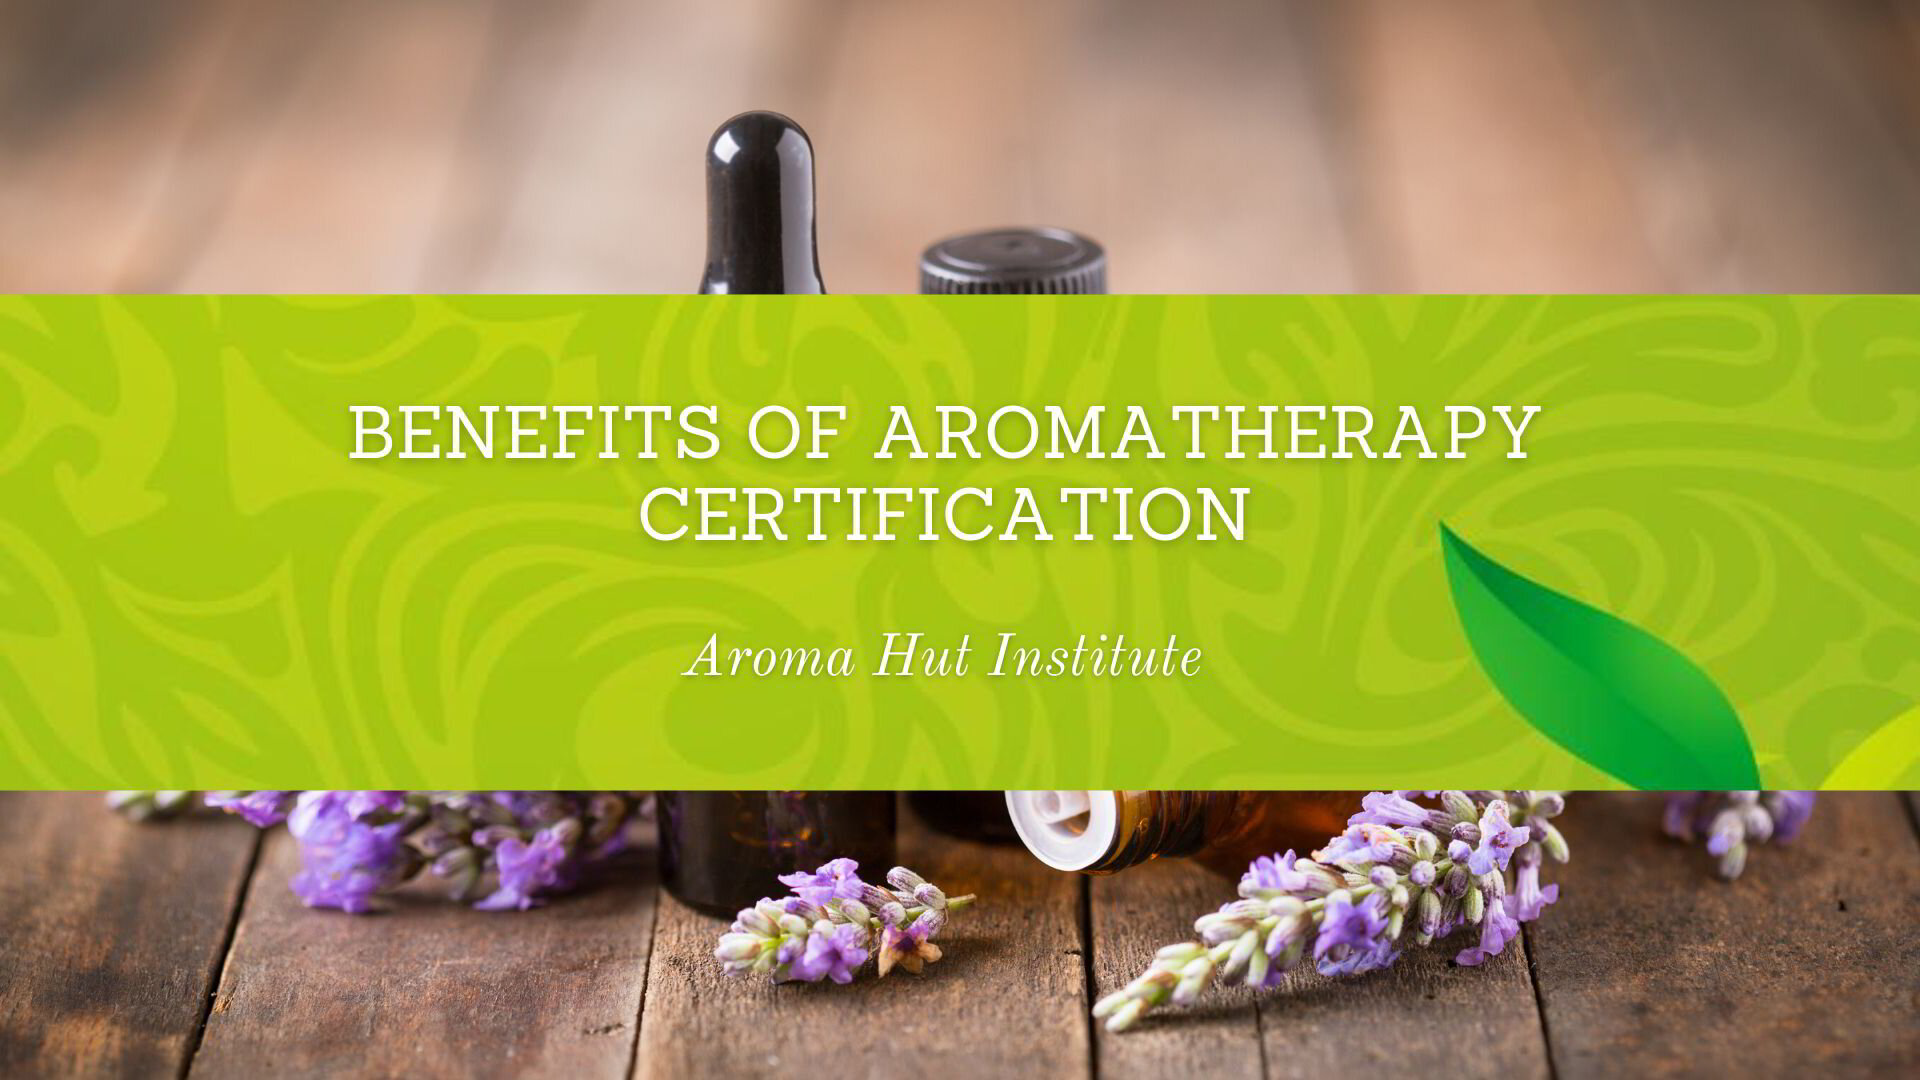 Benefits of Aromatherapy Certification